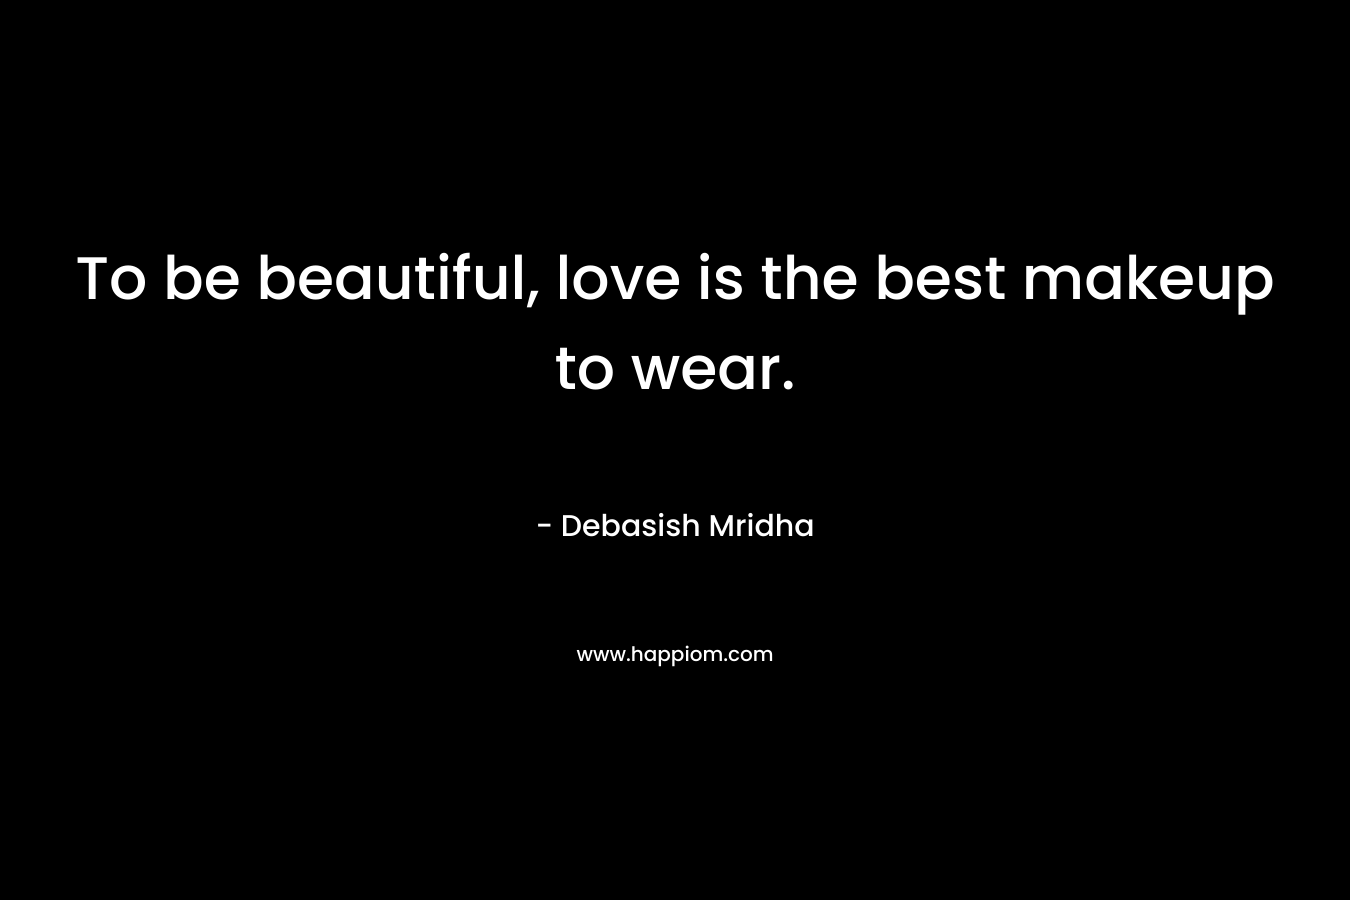 To be beautiful, love is the best makeup to wear.